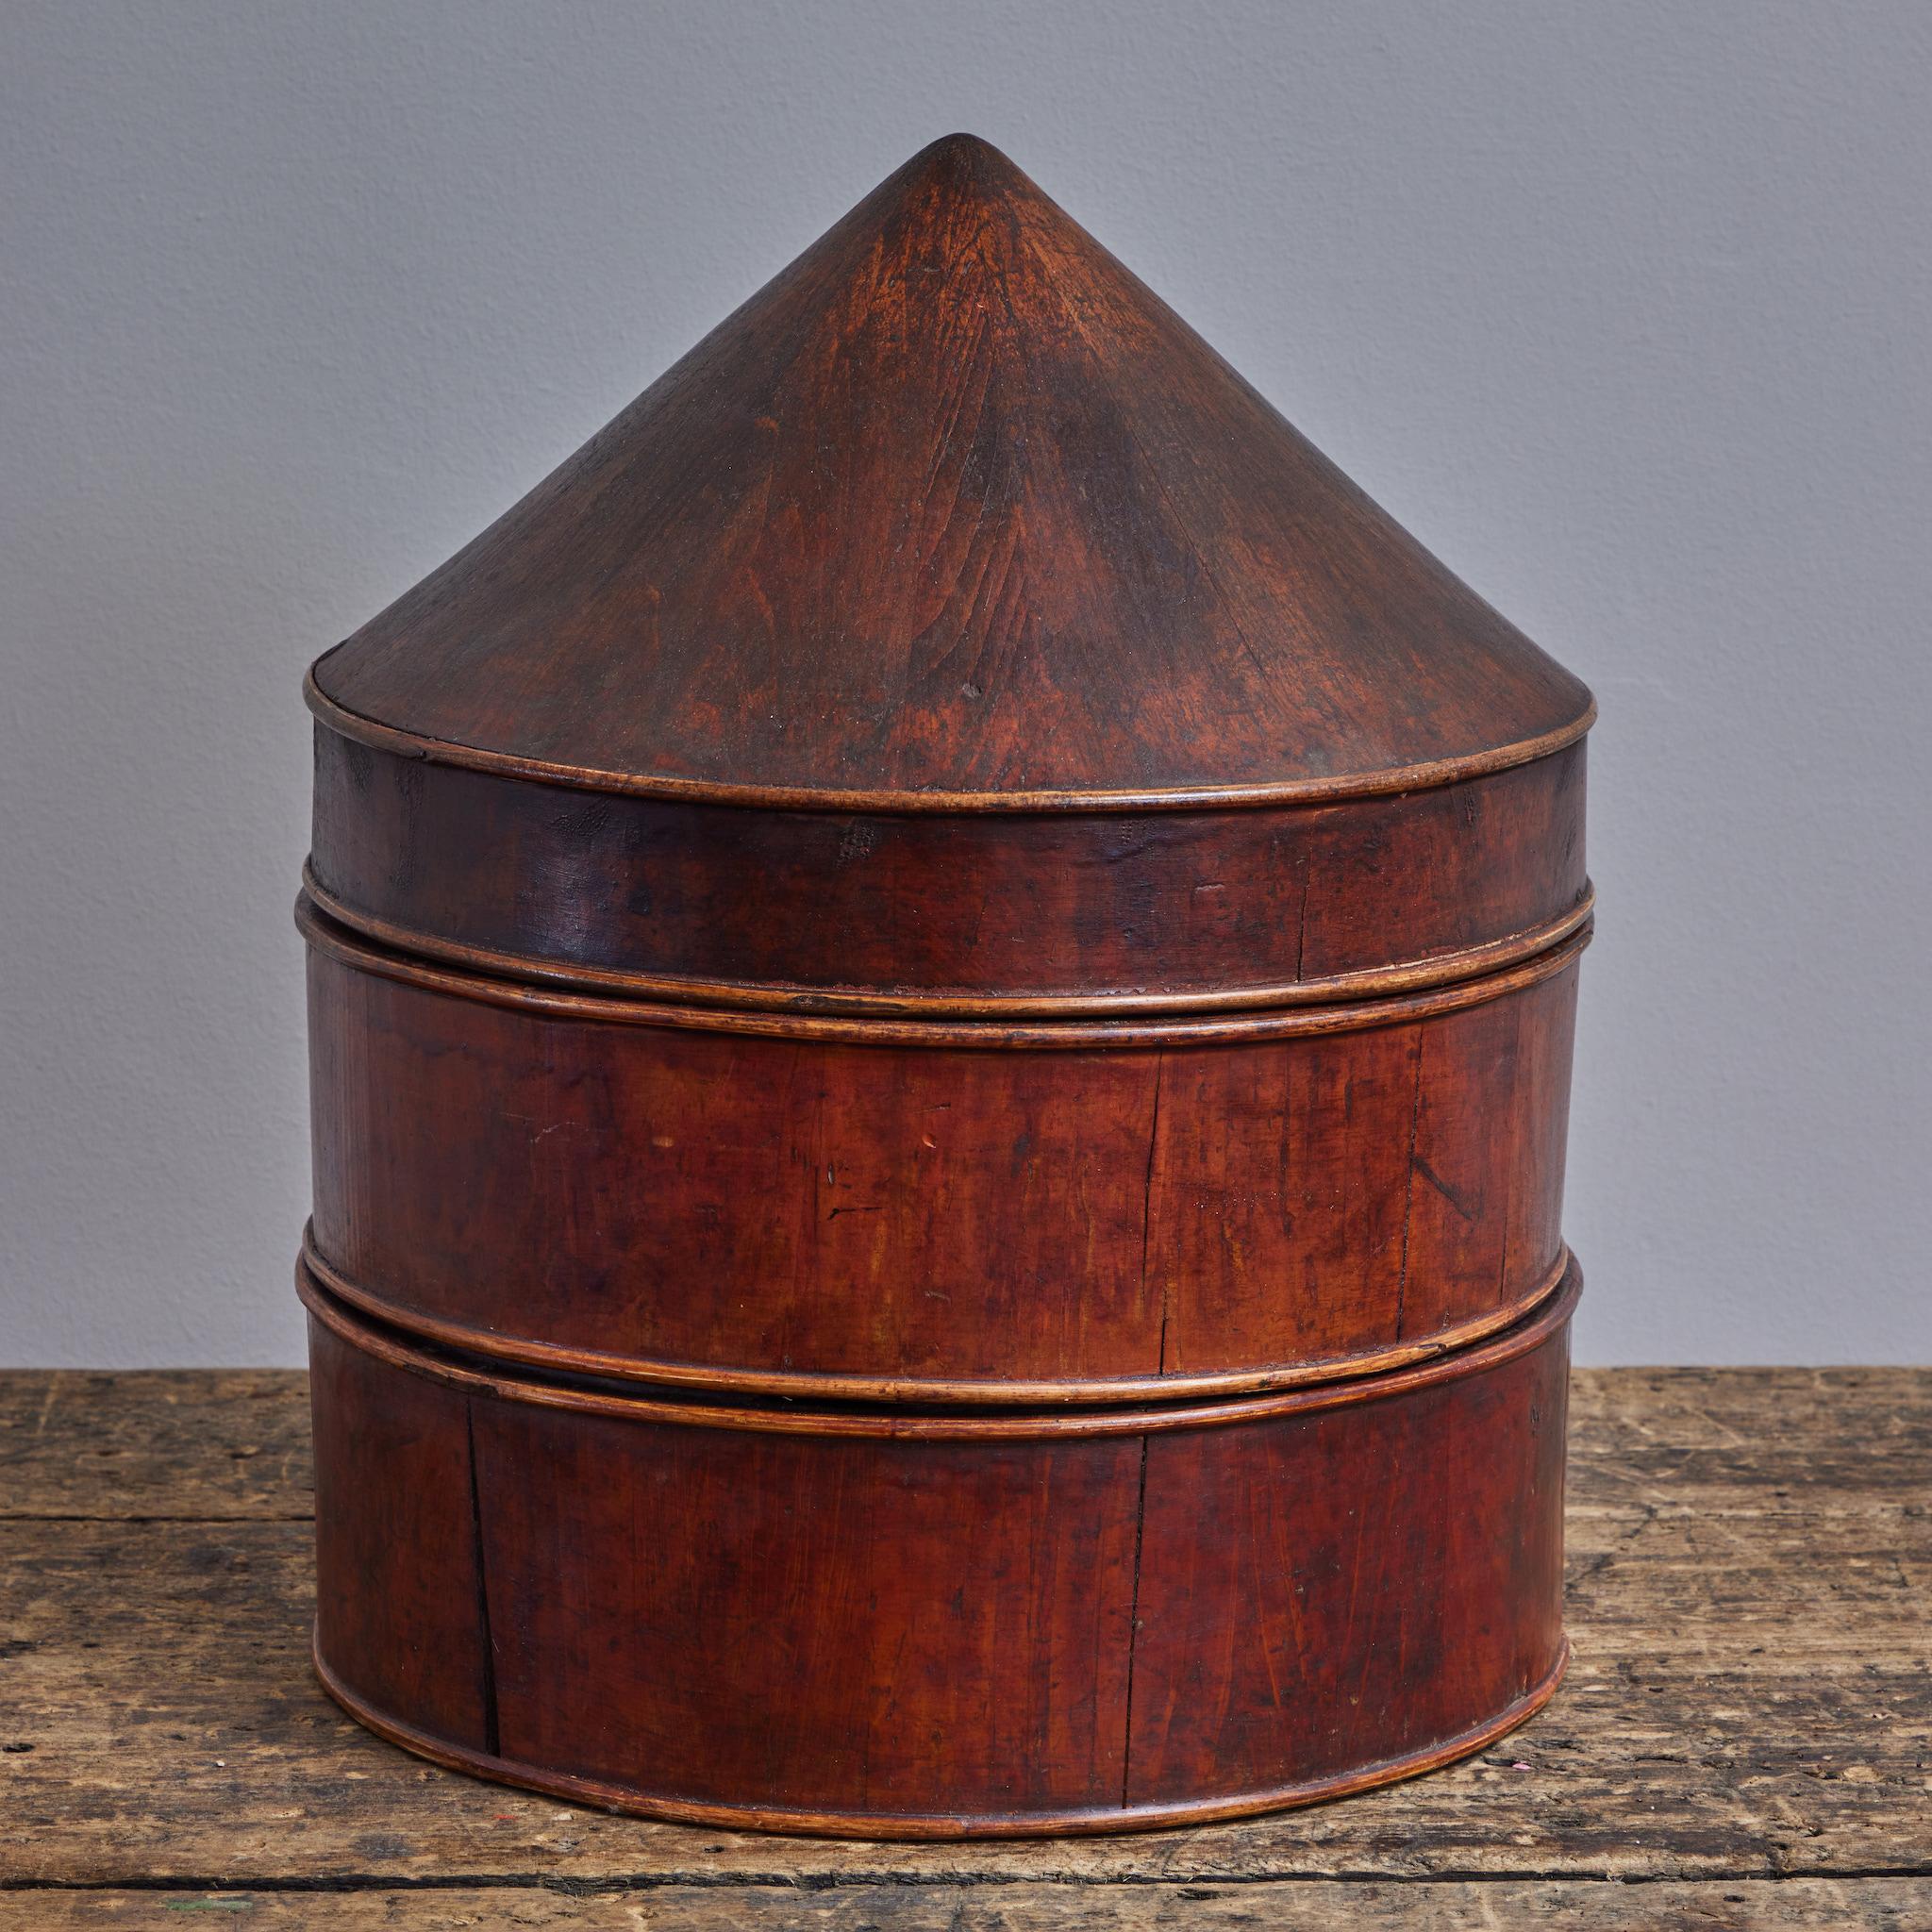 Chinese turn-of-the-century wooden hat box, with three tiered compartments. The conical lid gives the piece a sculptural quality, and is warmed by its bright and ruddy patina. A lovely and unique addition to any shelf or tabletop. 
